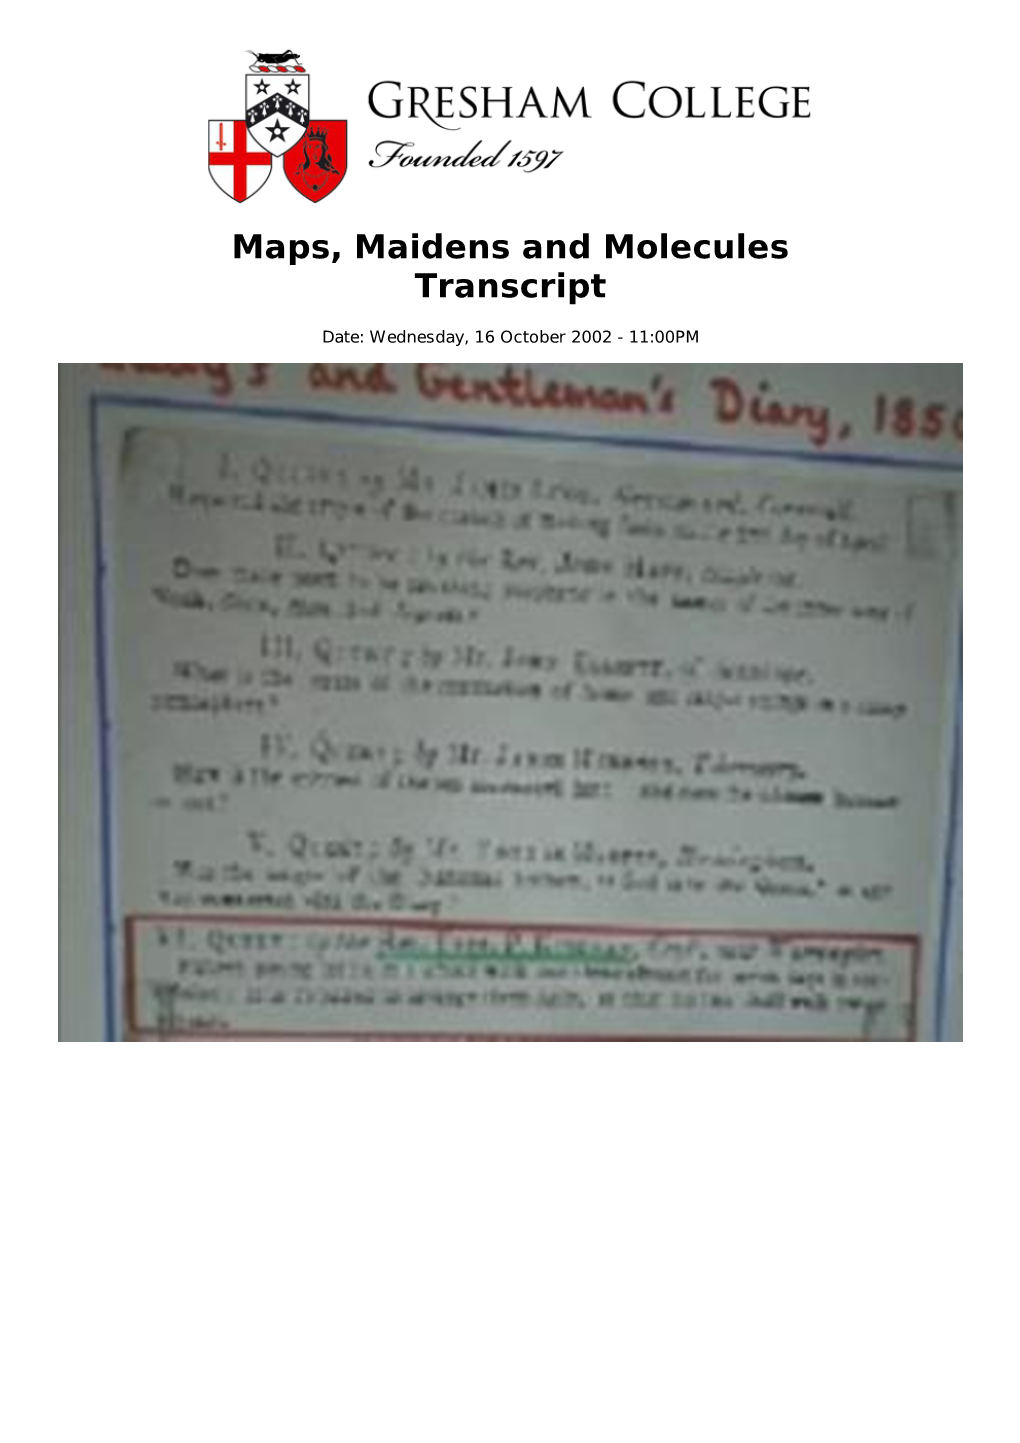 Maps, Maidens and Molecules Transcript